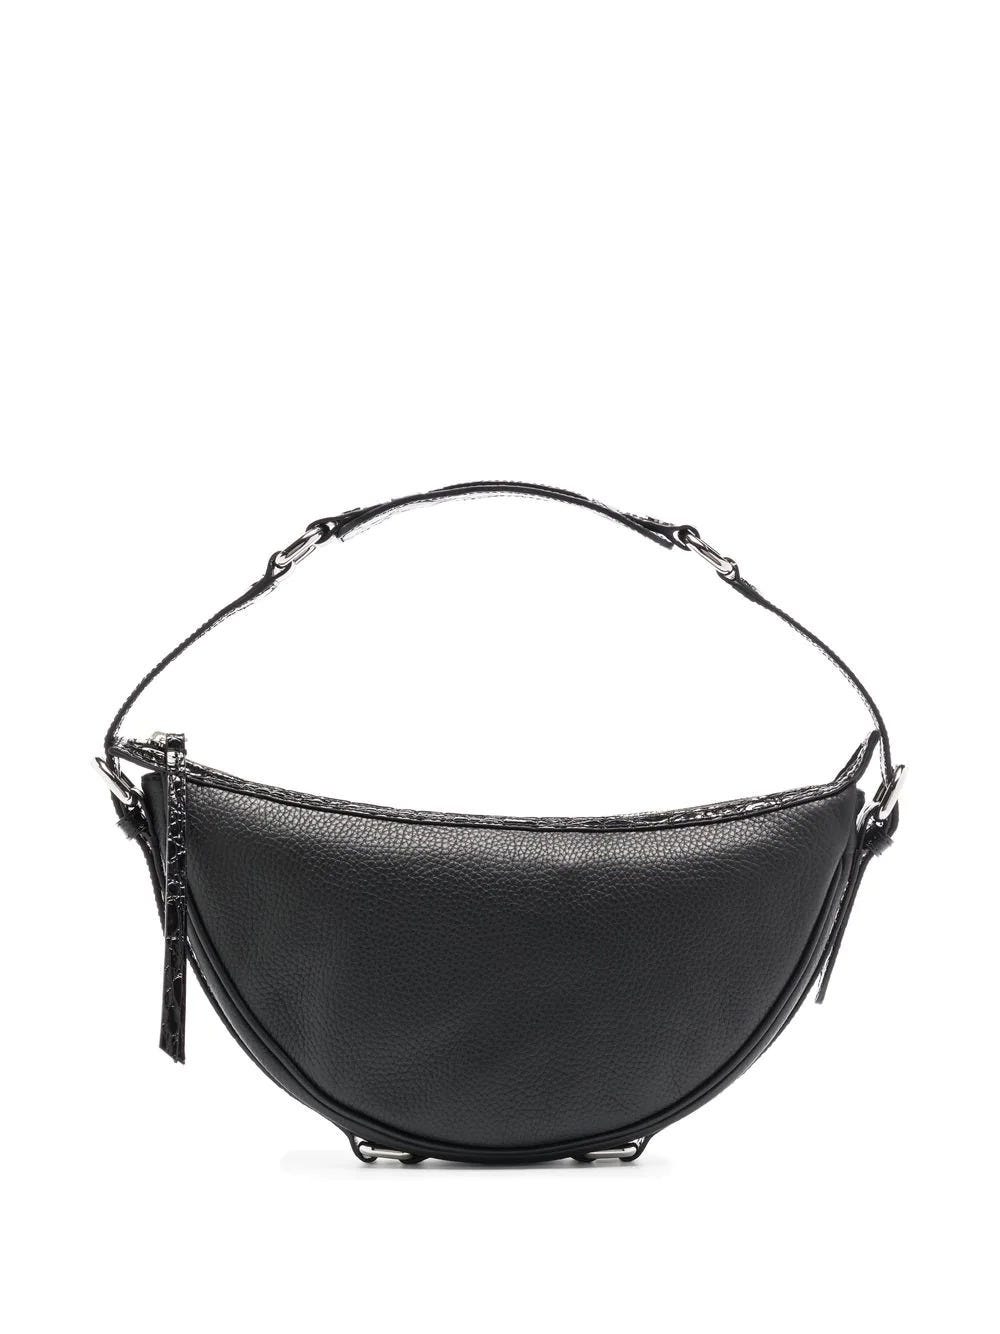 BY FAR BLACK SHOULDER BAG WITH GRAINED LEATHER